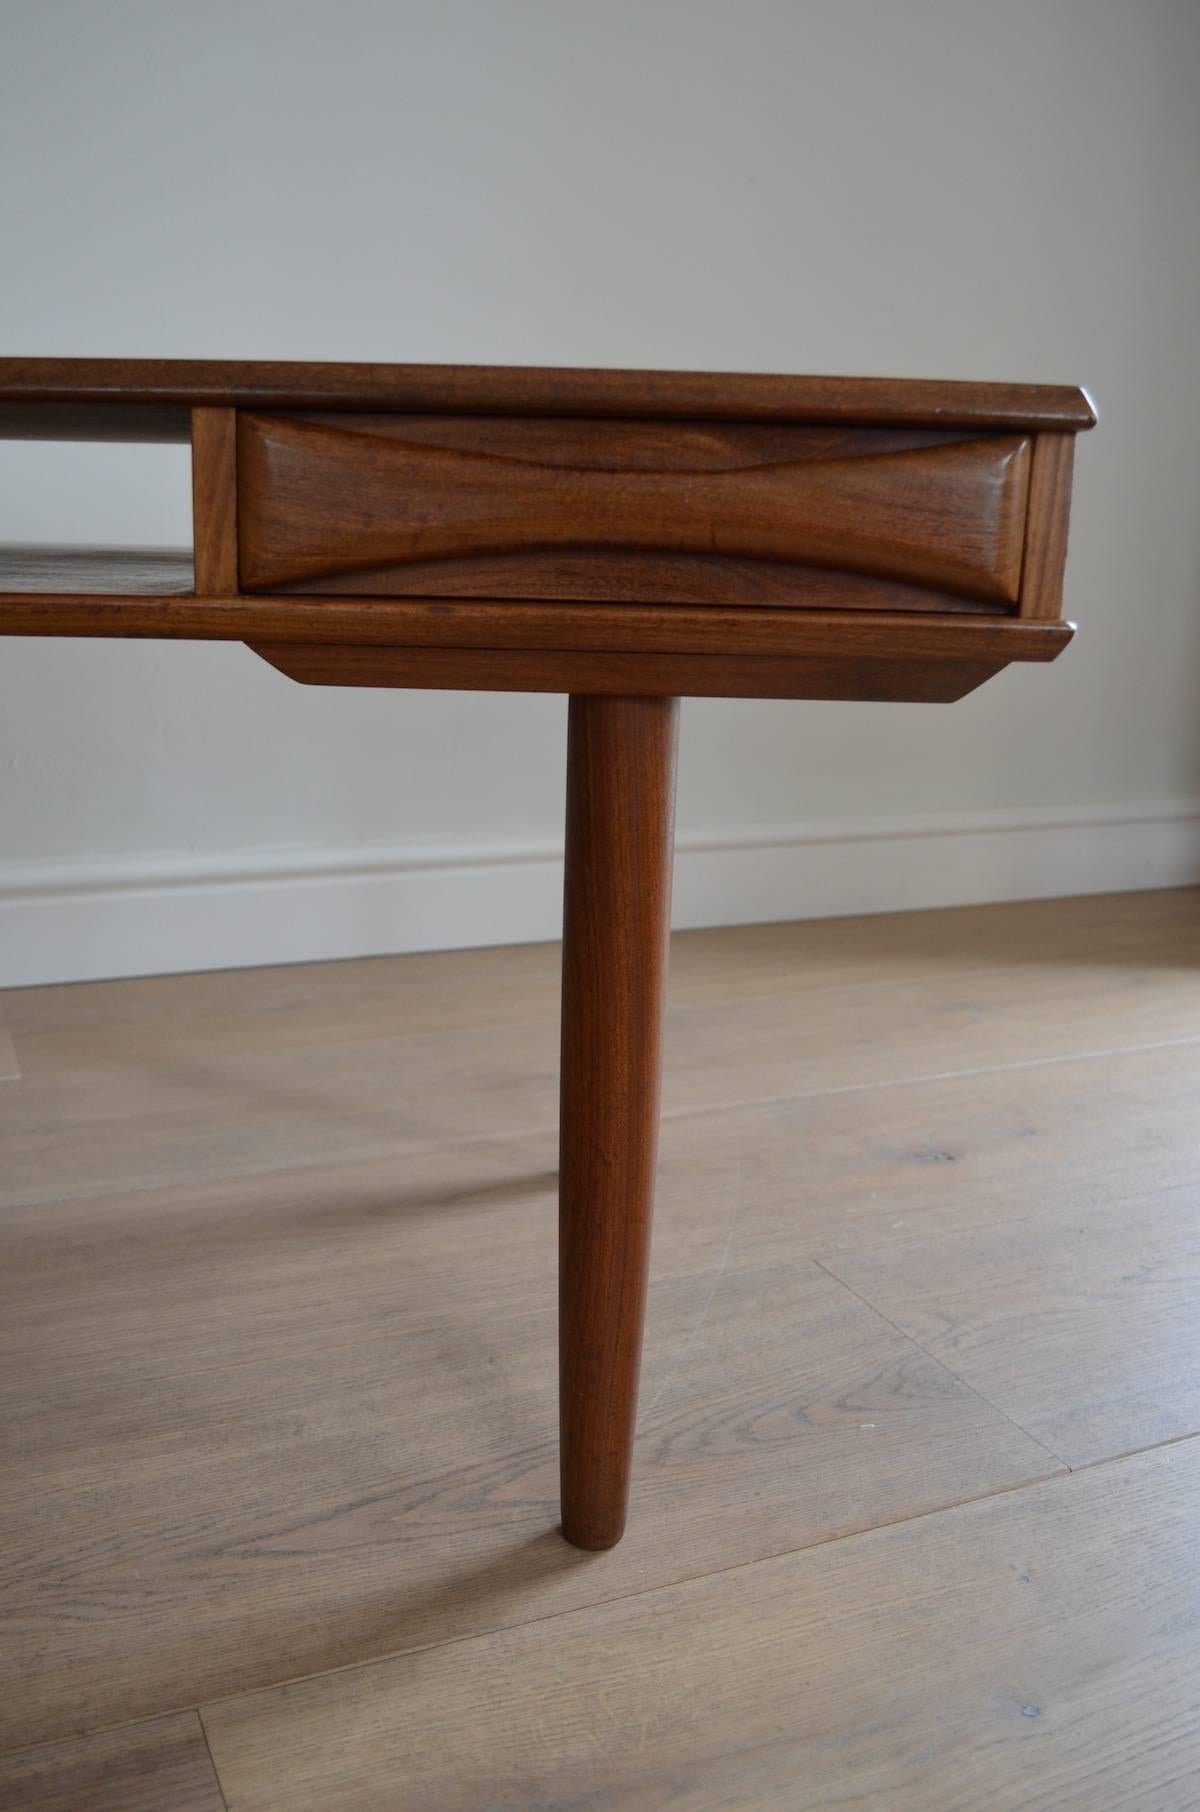 Arne Vodder Style Danish Teak Coffee Table, 1950s In Excellent Condition For Sale In London, Greater London